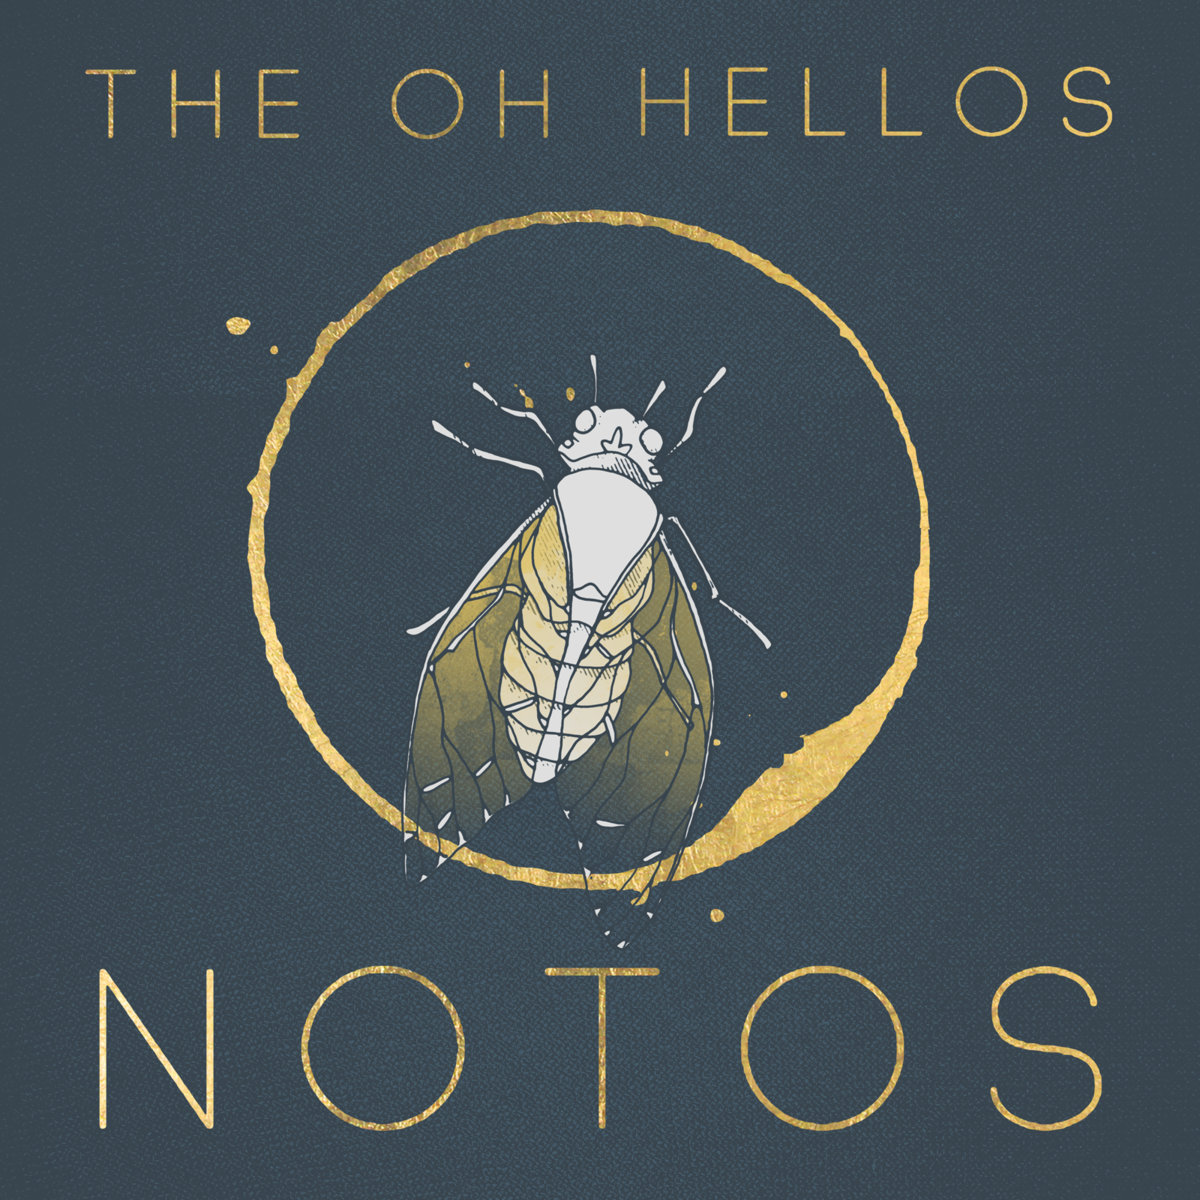 The oh hellos. The Oh hellos альбомы. The Oh hellos о группе. The Oh hellos Венти.